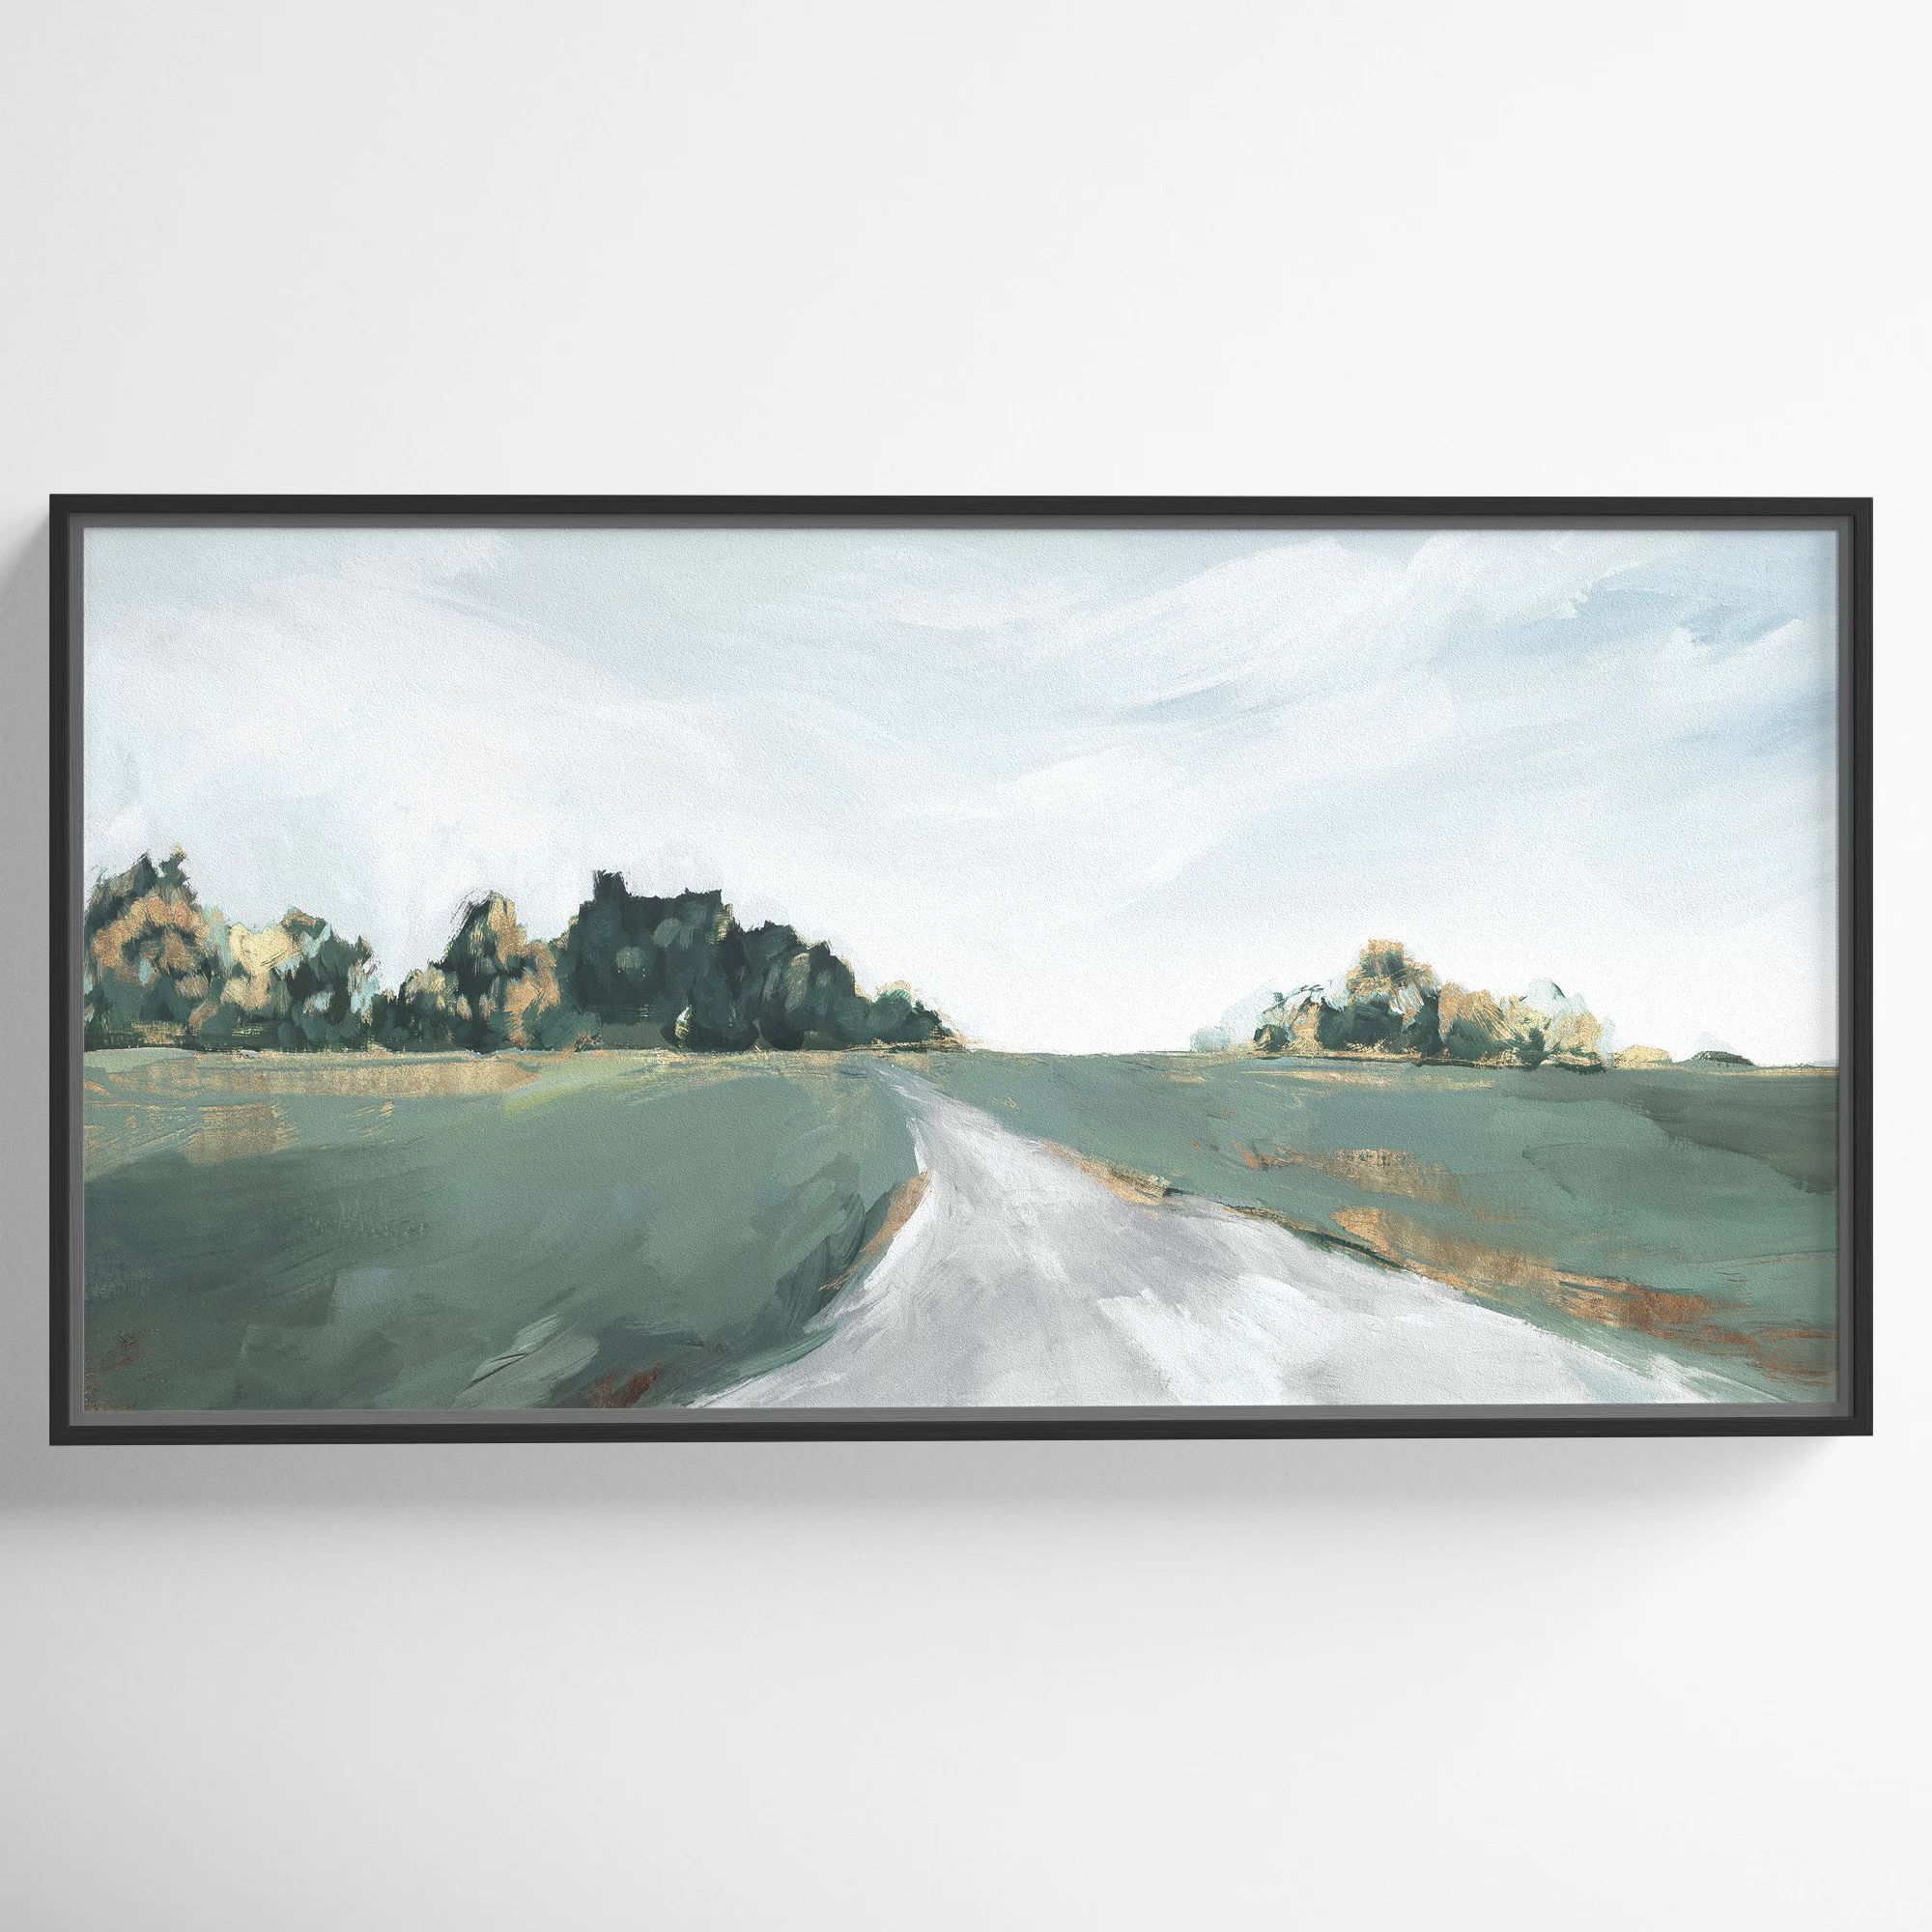 Field of Dreams by Isabelle Z - Painting Print | Wayfair Professional